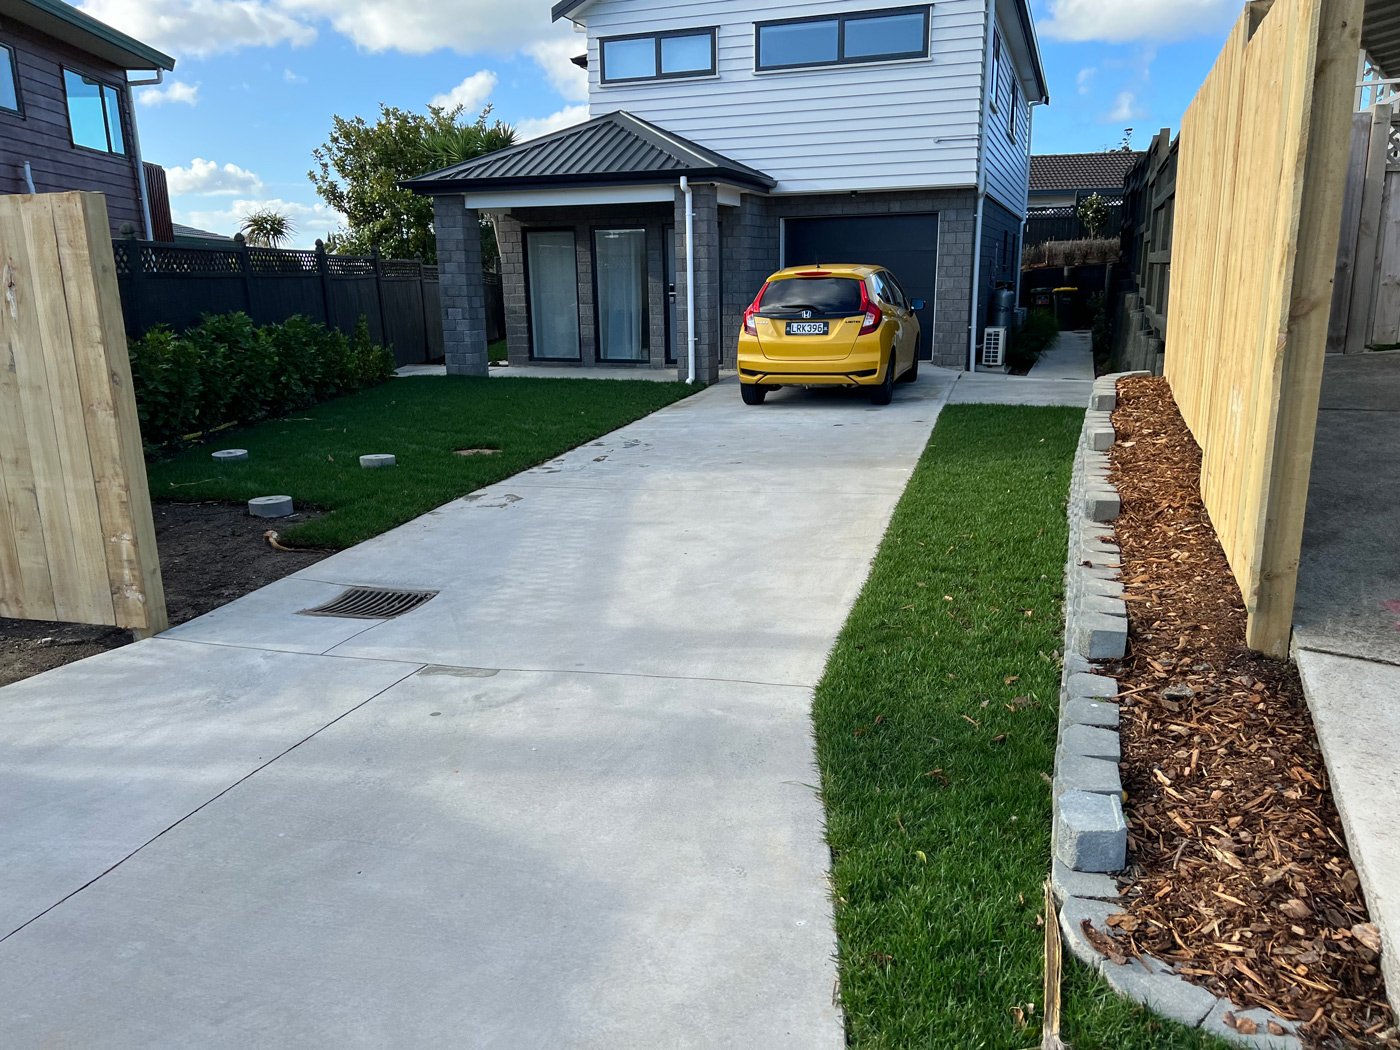 New build with a smooth concrete driveway with a grate for drainage and and a lively grass yard